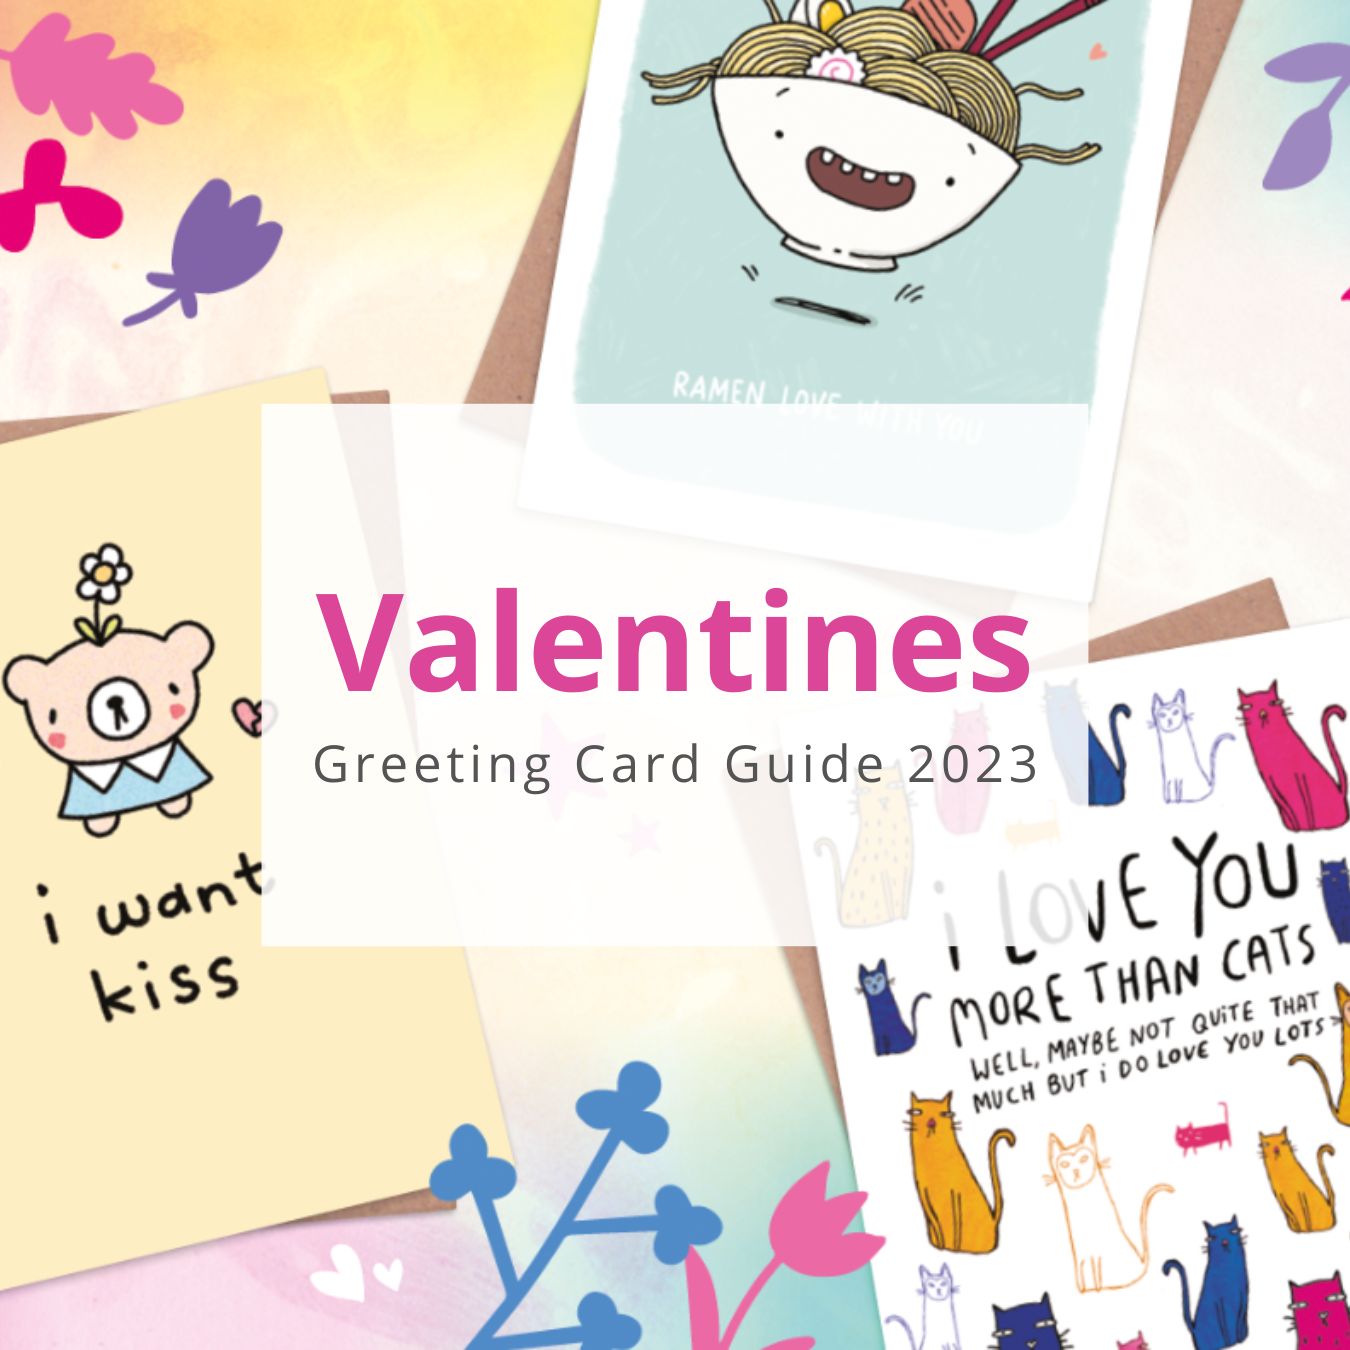 Valentines Day Greeting Card Guide 2023